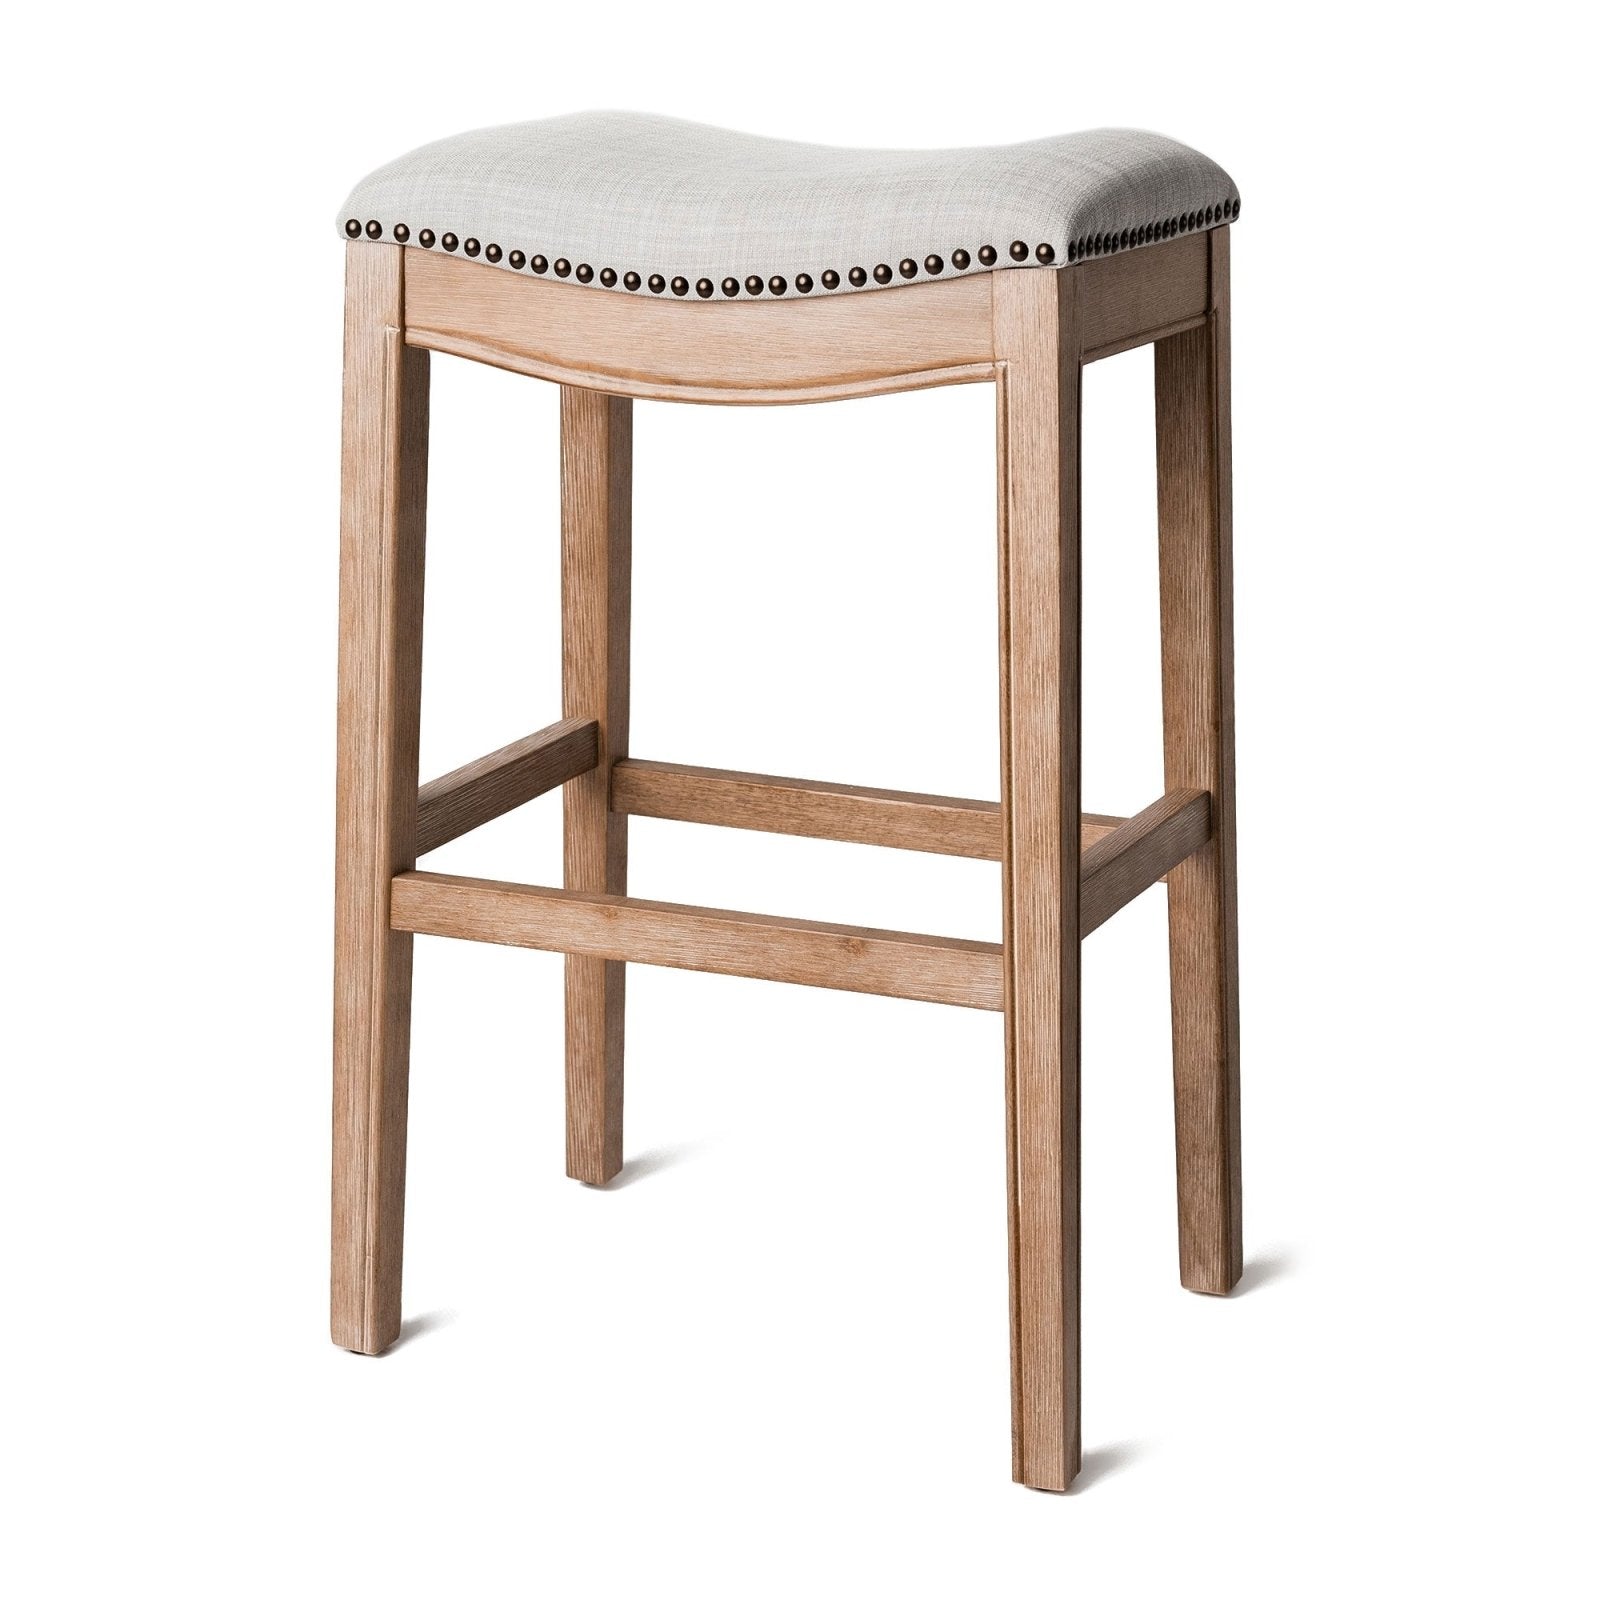 Adrien Saddle Bar Stool in Weathered Oak Finish w/ Sand Color Fabric Upholstery